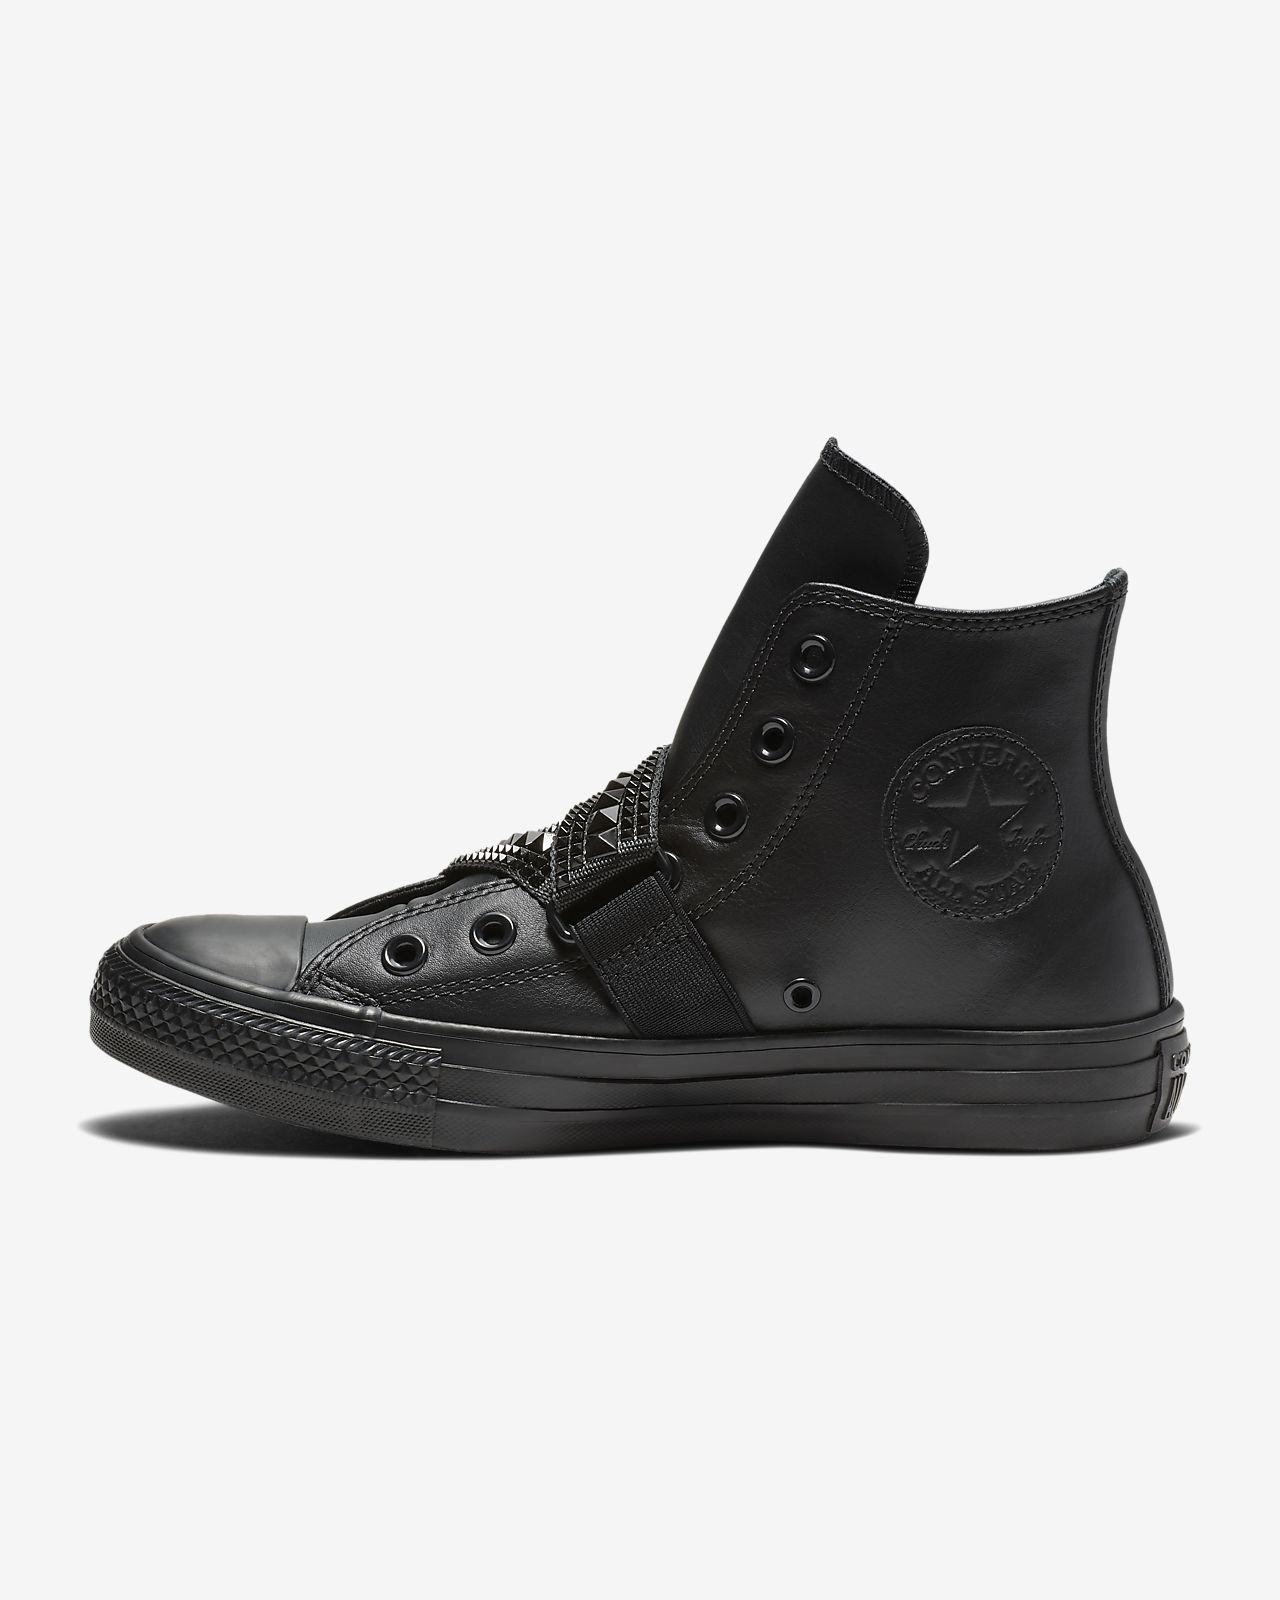 Converse Chuck Taylor All Star Punk Strap Leather High Top Women's Shoe ...